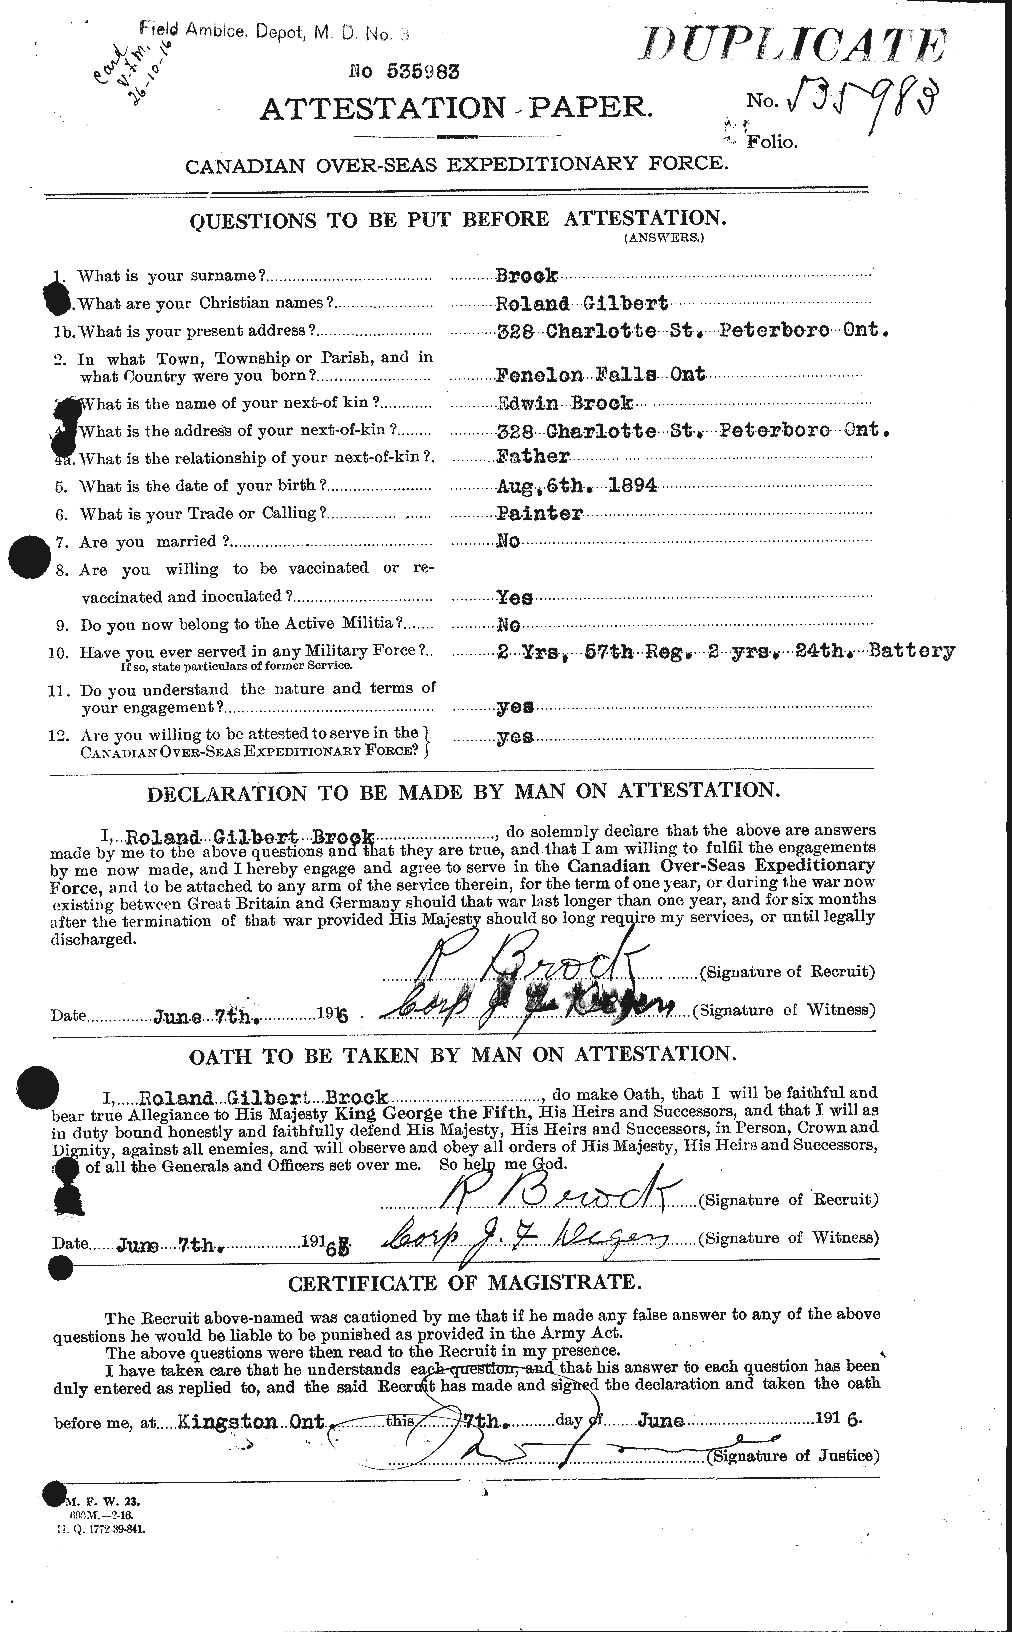 Personnel Records of the First World War - CEF 258236a